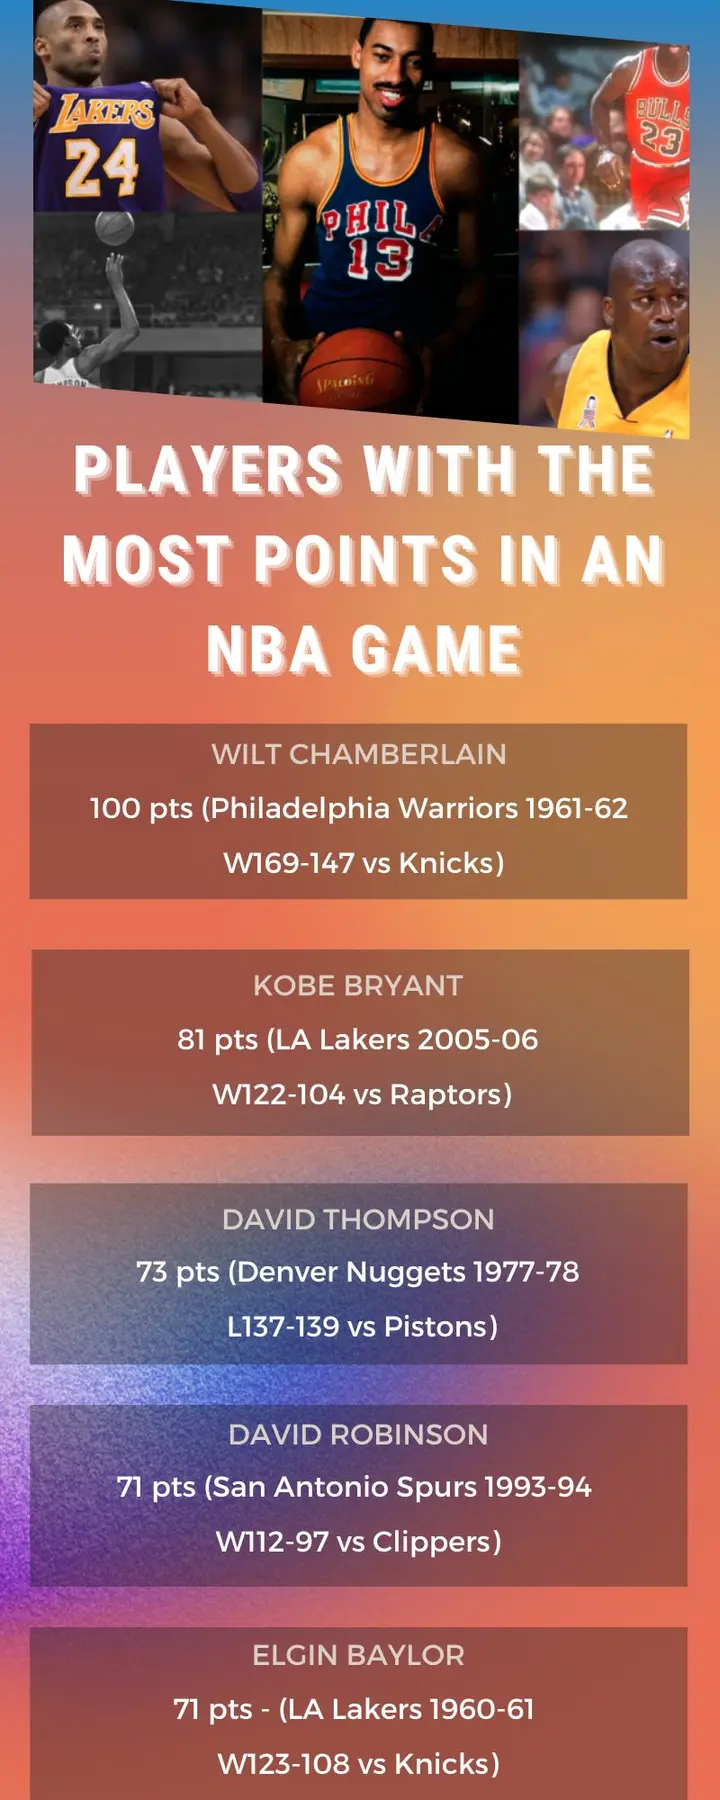 Players with the most points in an NBA game